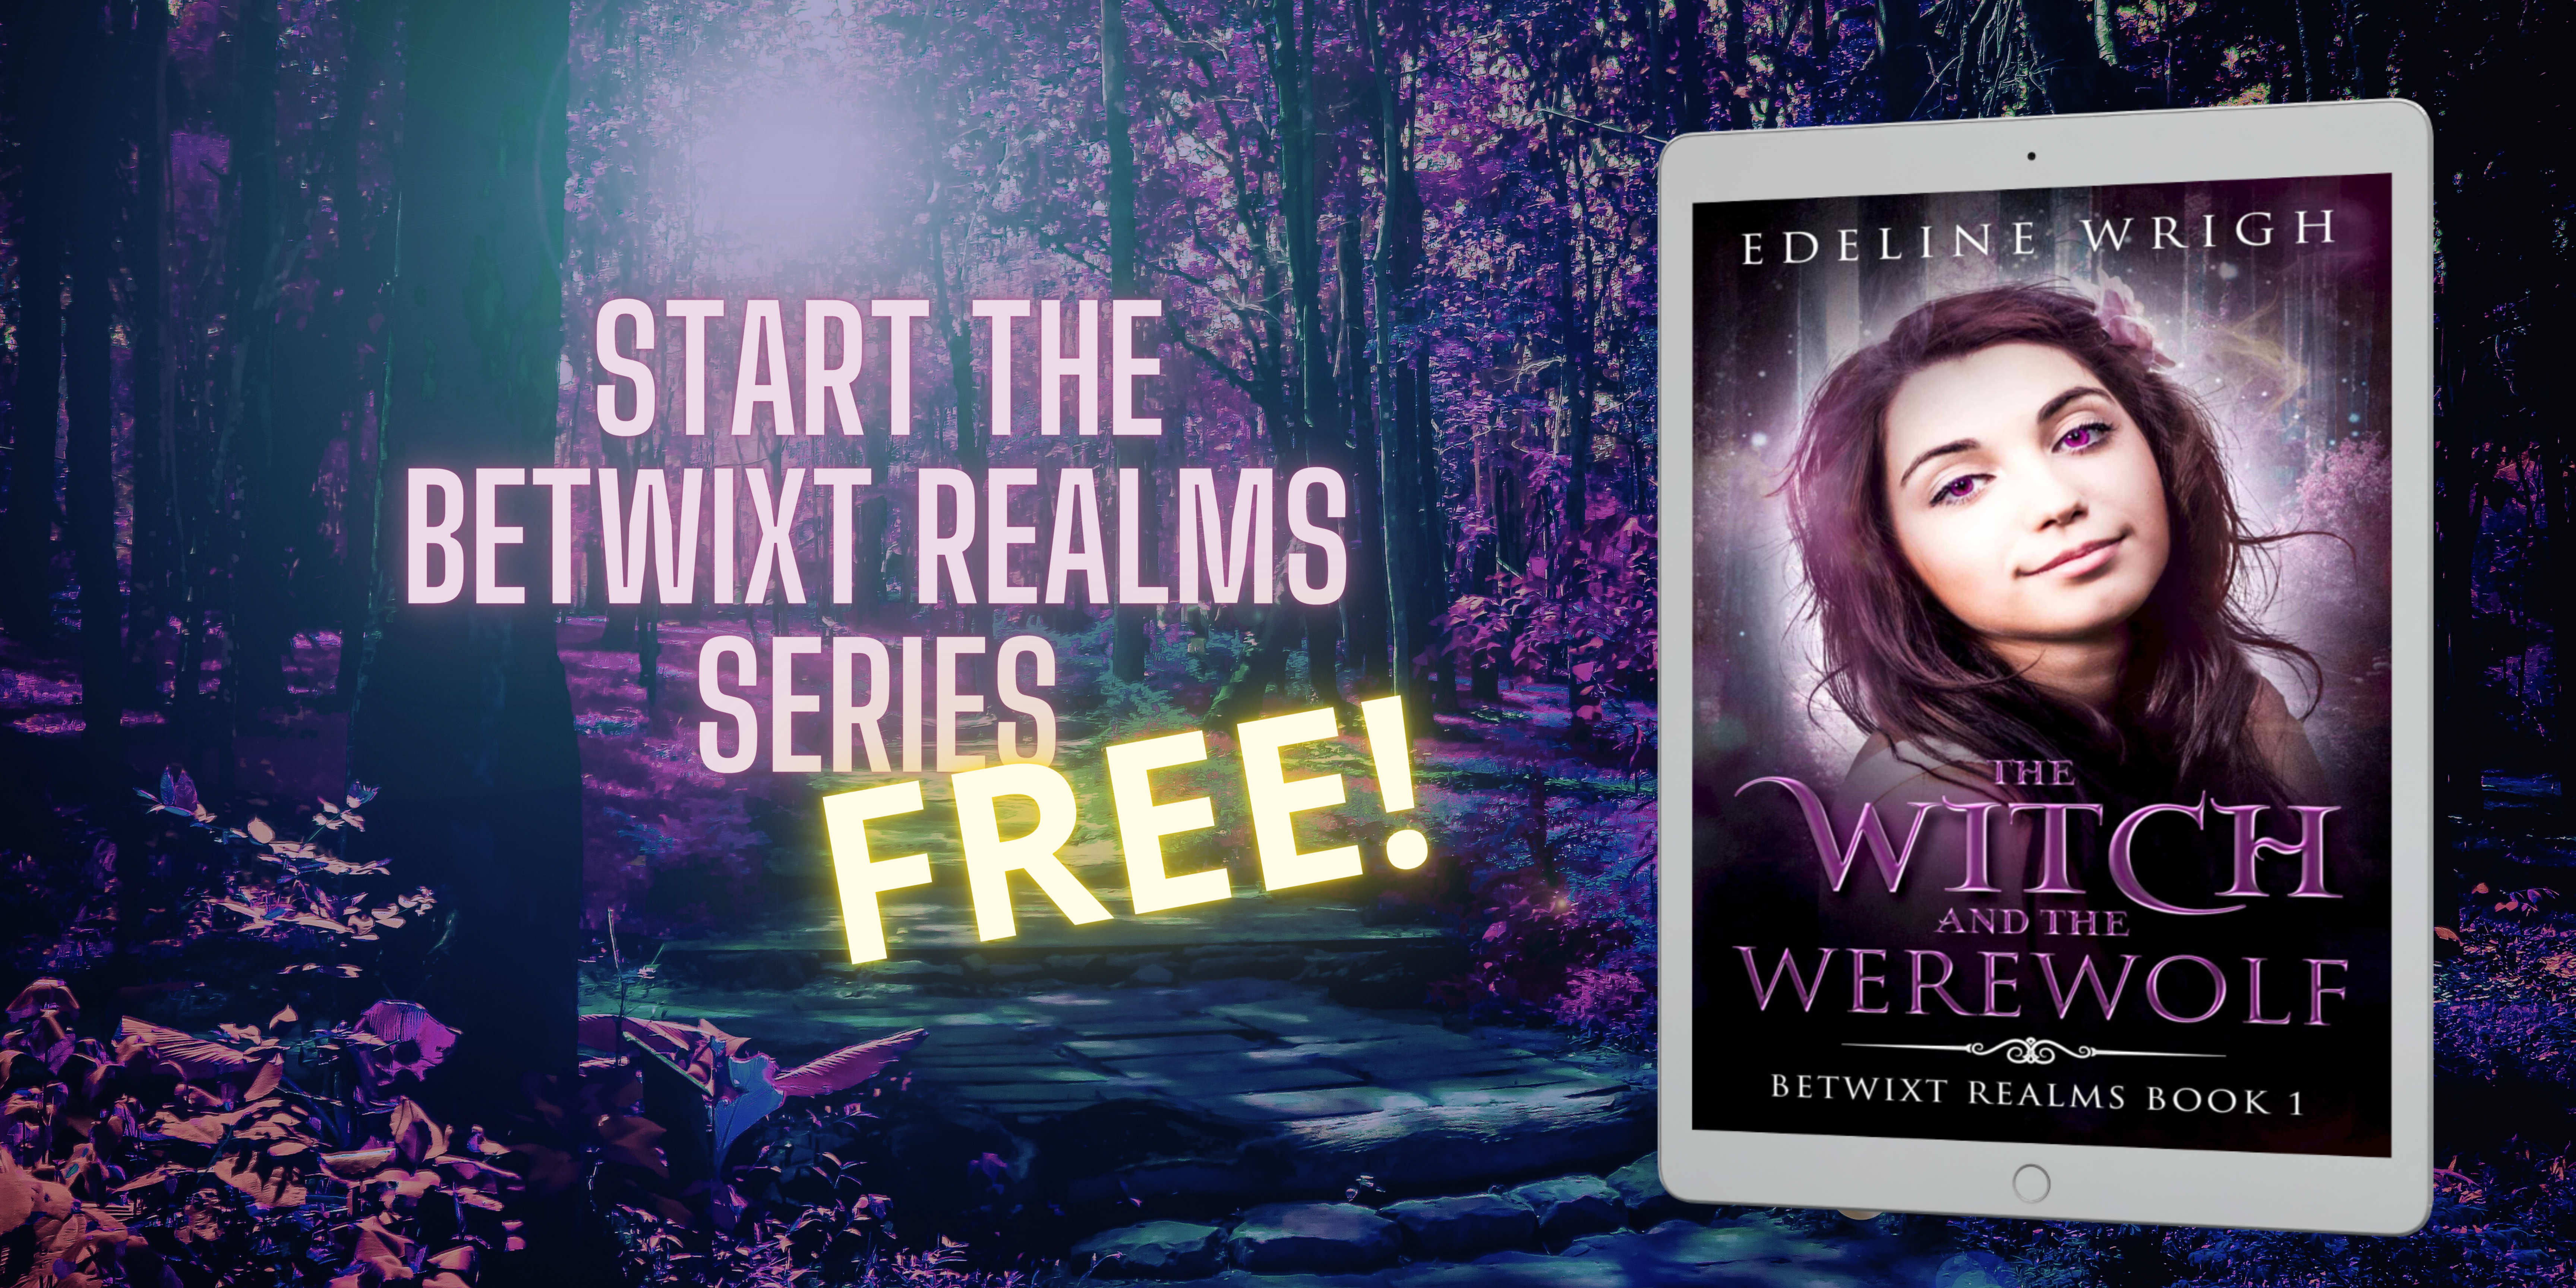 Banner reads "Start the Betwixt Realms series free" next to a cover of The Witch and the Werewolf: Betwixt Realms book 1